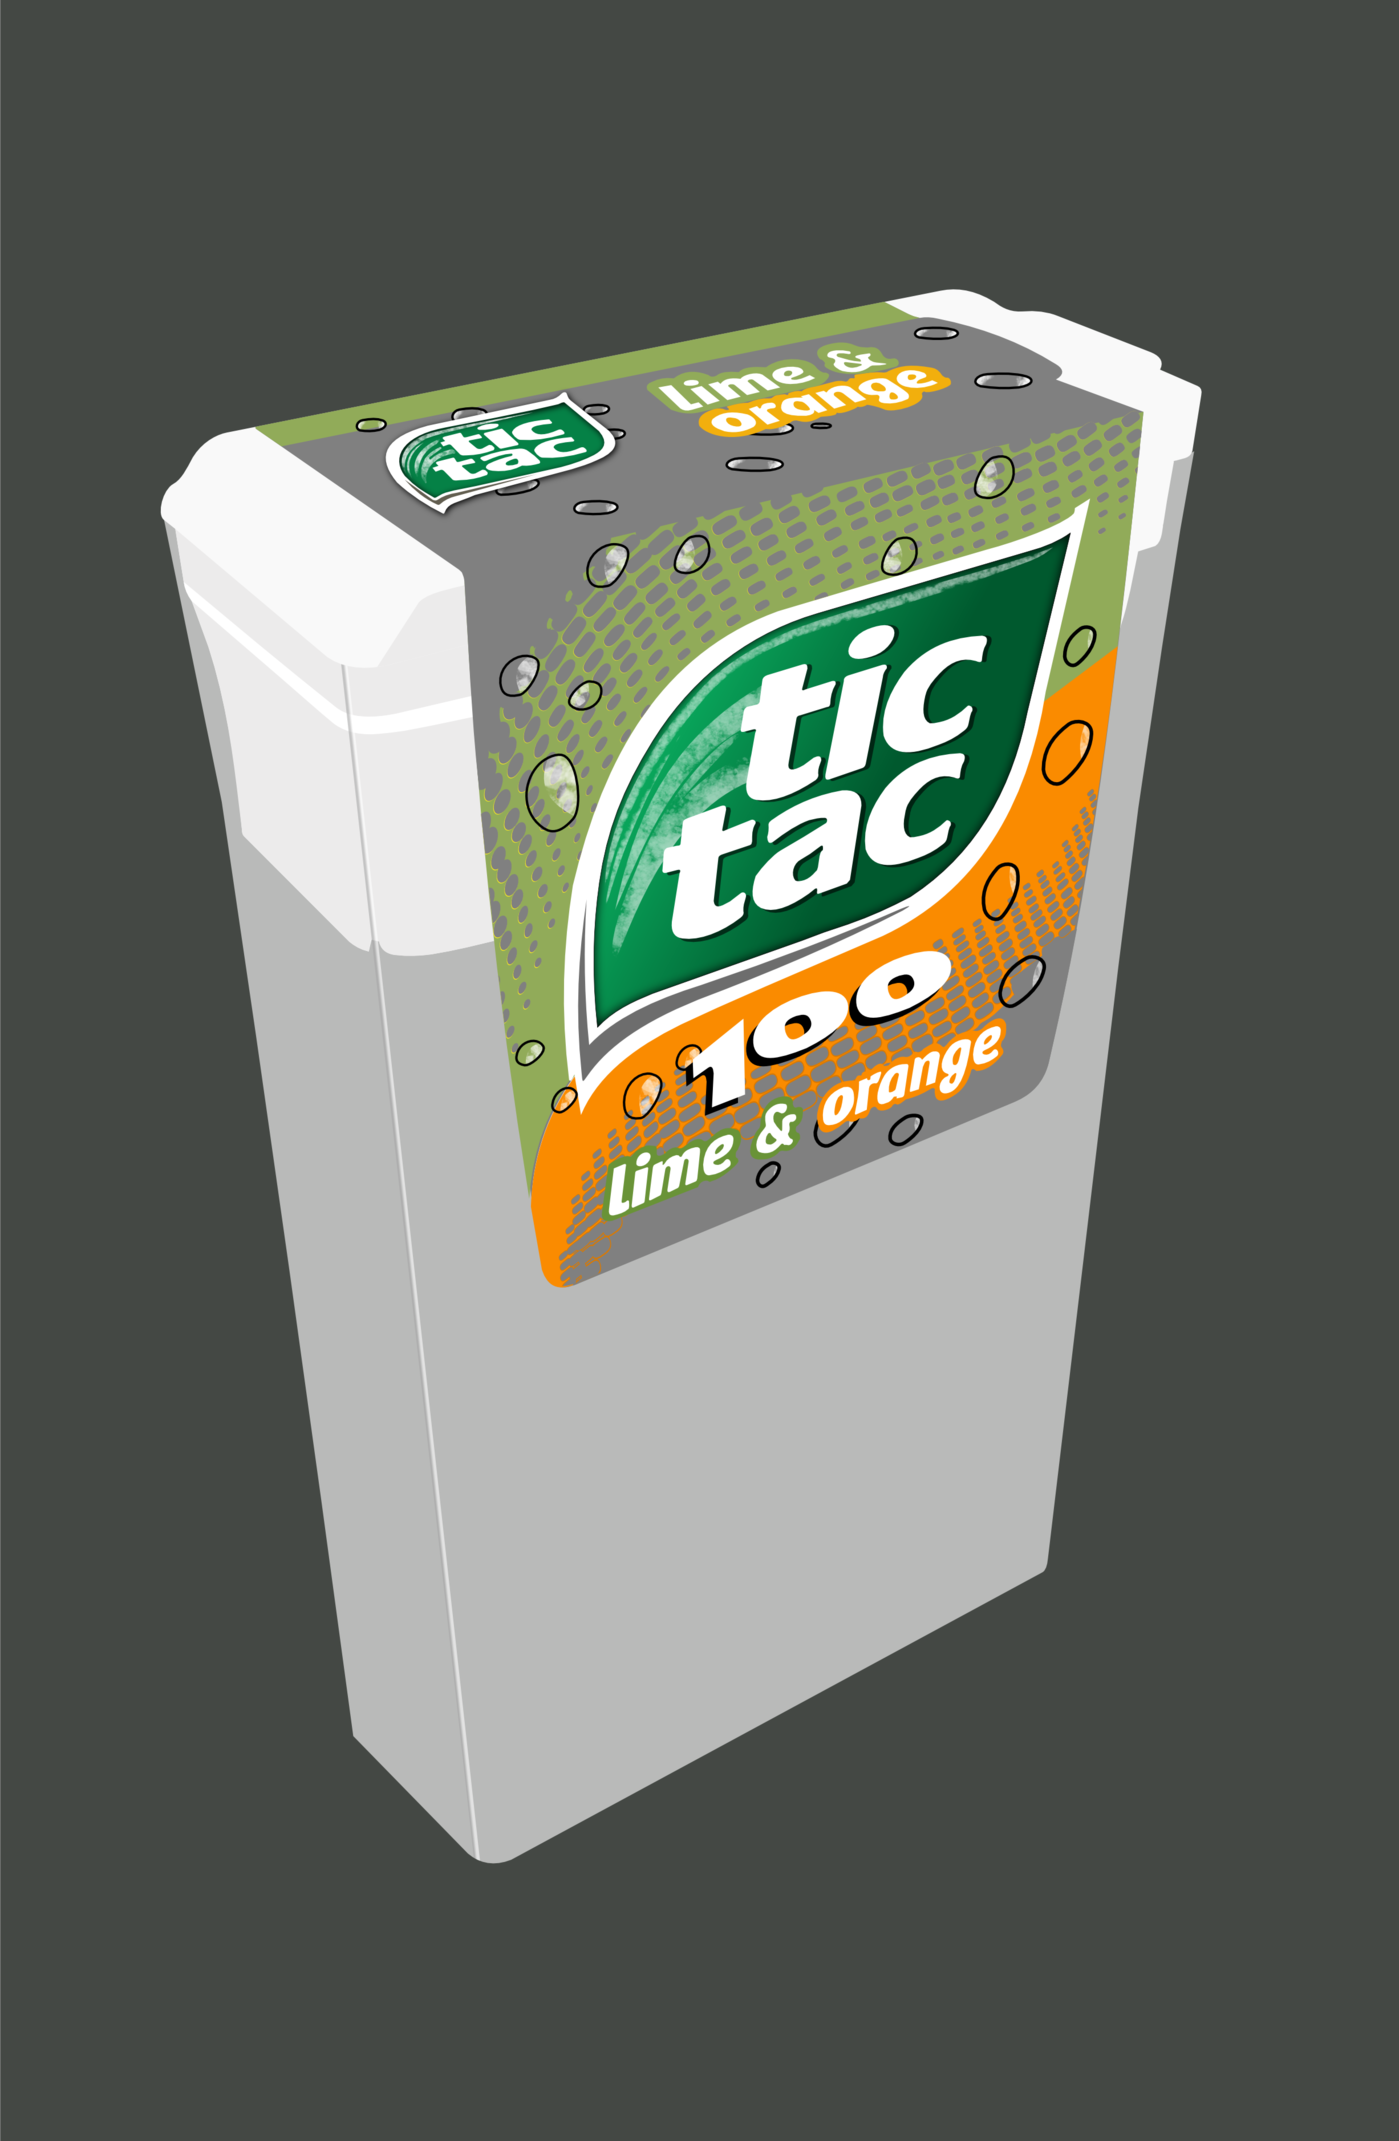 Tic Tac Box
Learning to draw using Affinity Designer, so had a go at Tic Tacs. Sweets to be provided later :)
Keywords: Tic Tac Box Affinity Designer SVG